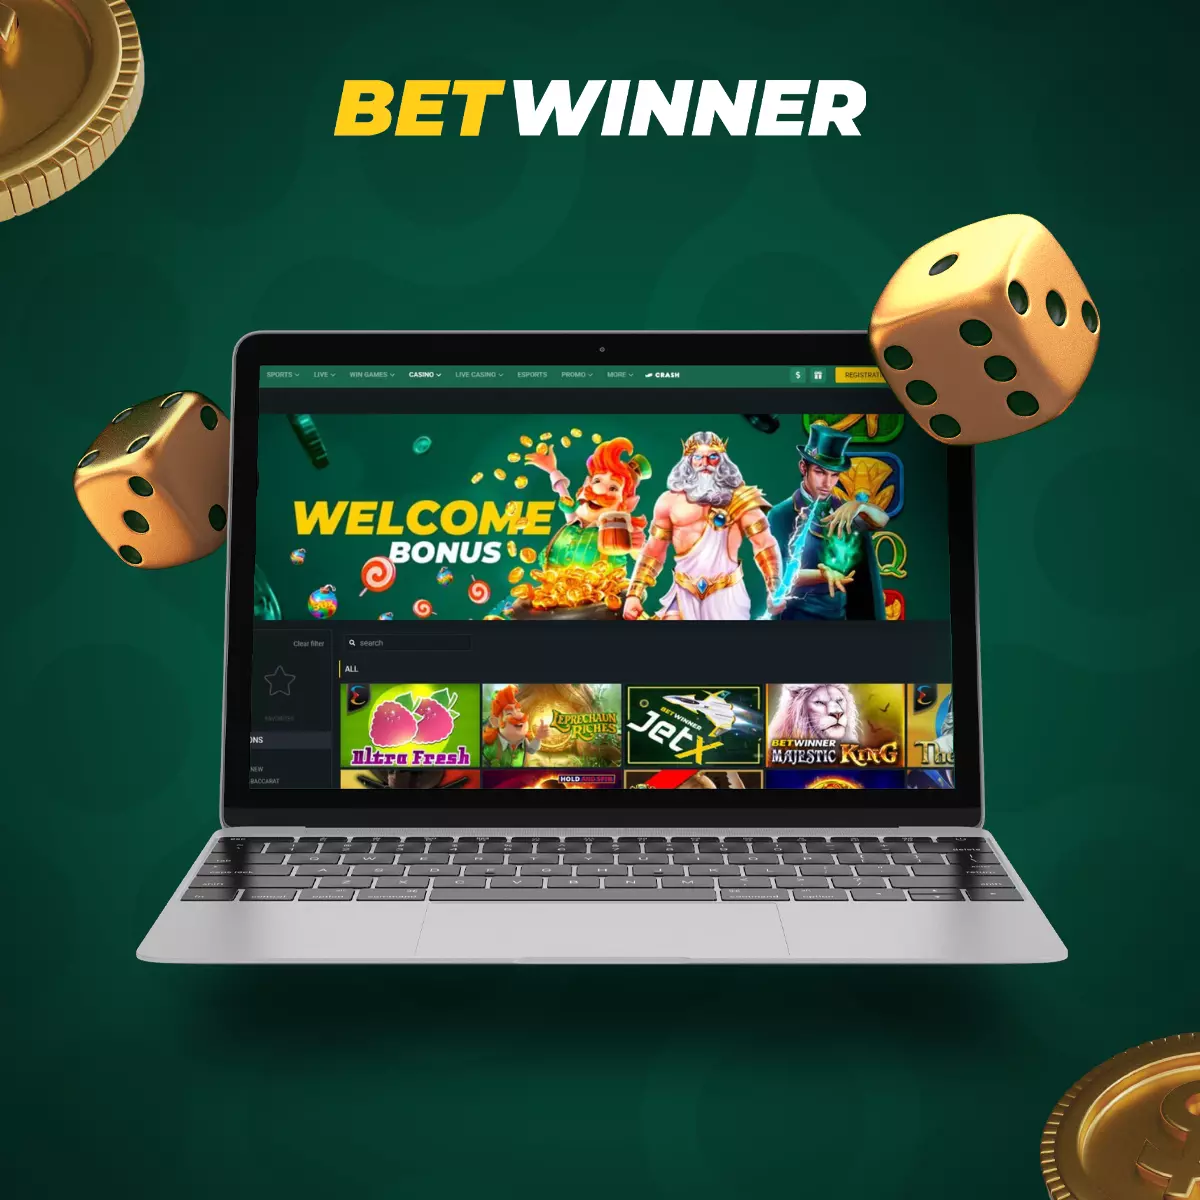 What Makes betwinner That Different